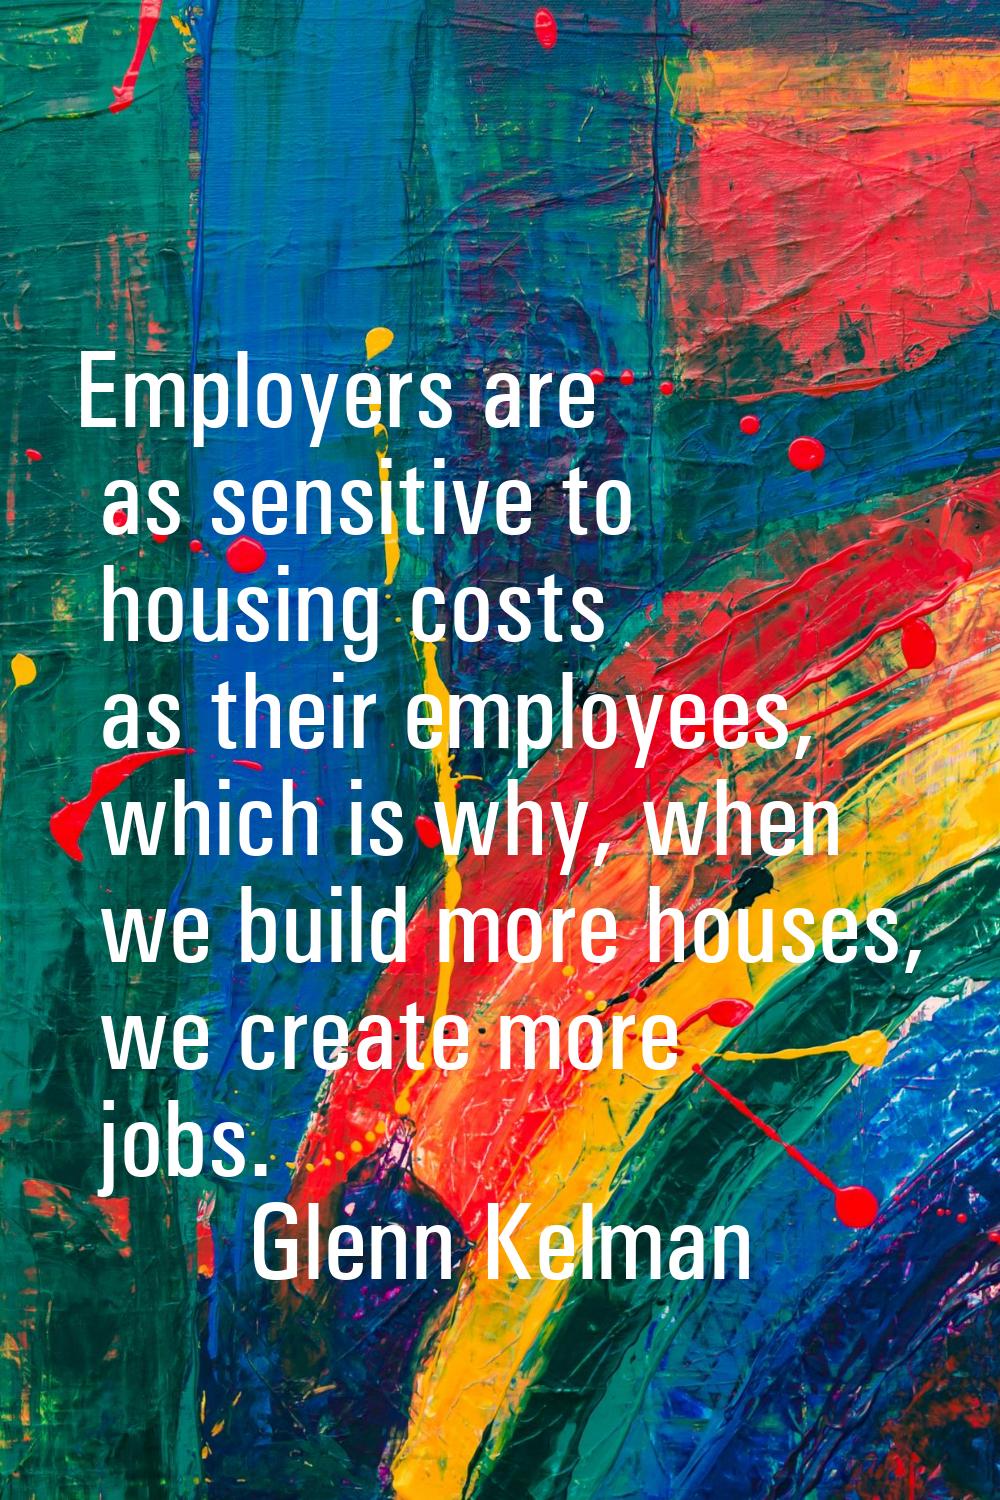 Employers are as sensitive to housing costs as their employees, which is why, when we build more ho